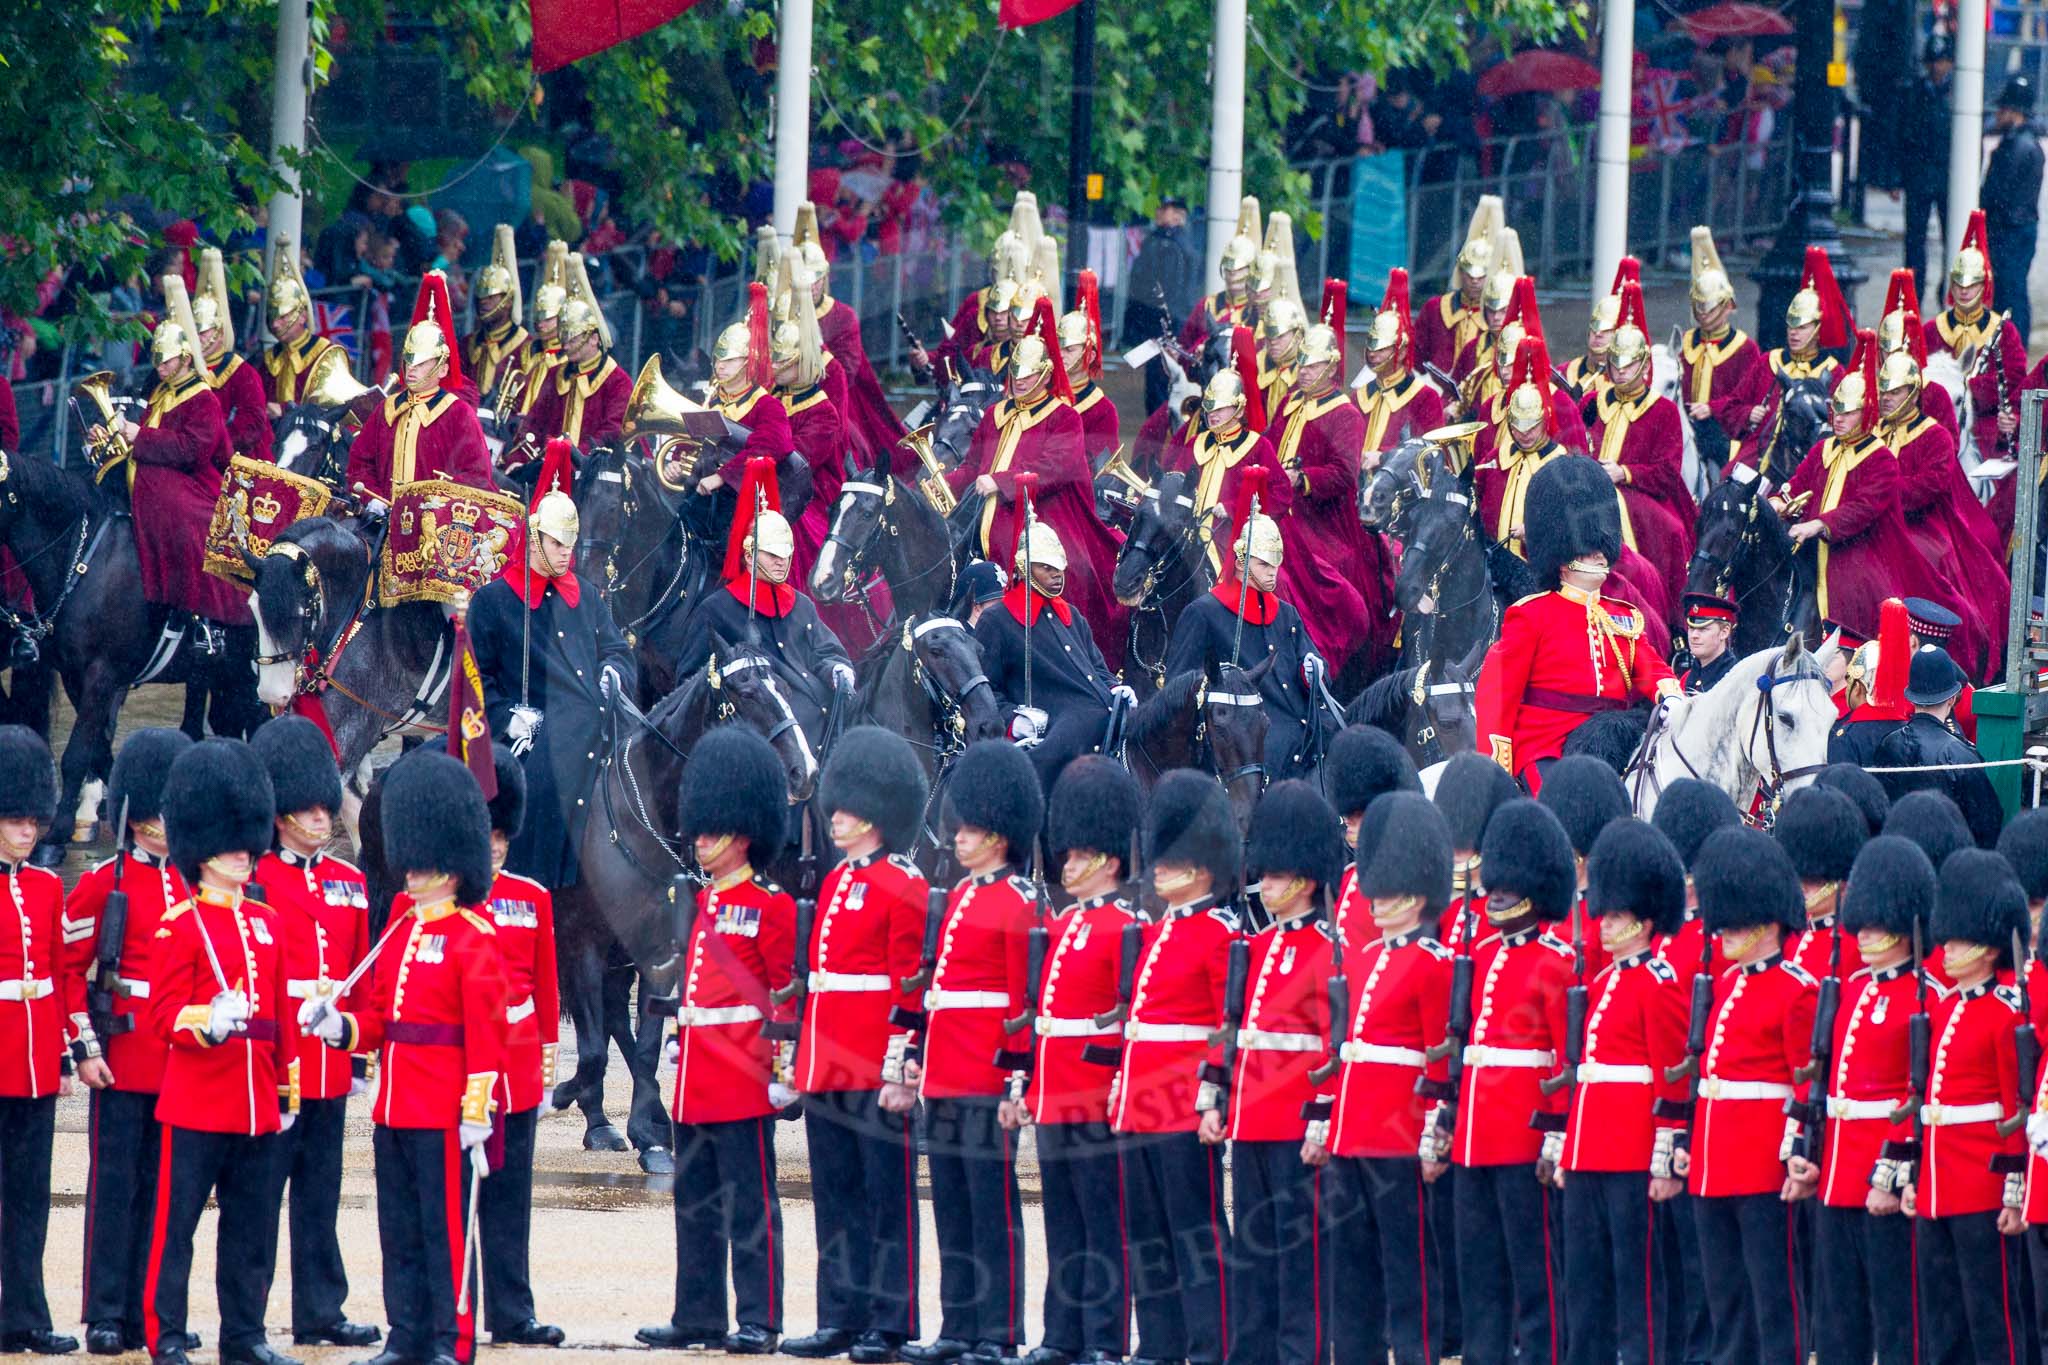 The Colonel's Review 2014.
Horse Guards Parade, Westminster,
London,

United Kingdom,
on 07 June 2014 at 10:56, image #225